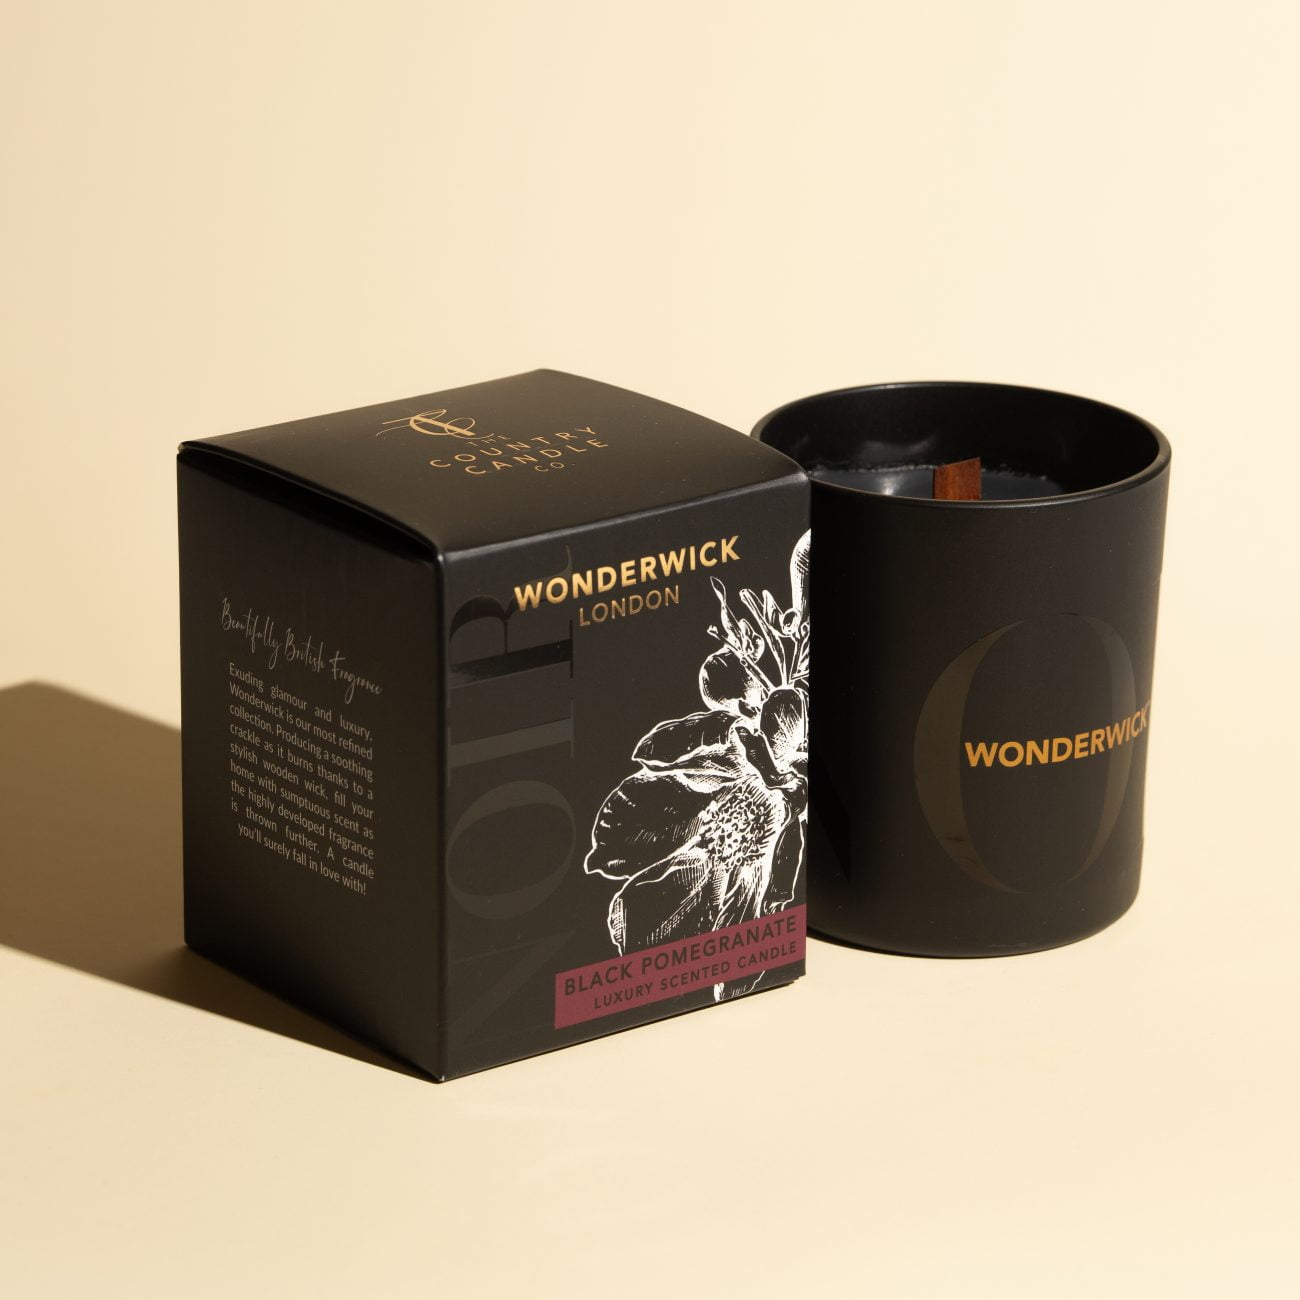 The Country Candle Company Wonderwick Candle in Black Pomegranate